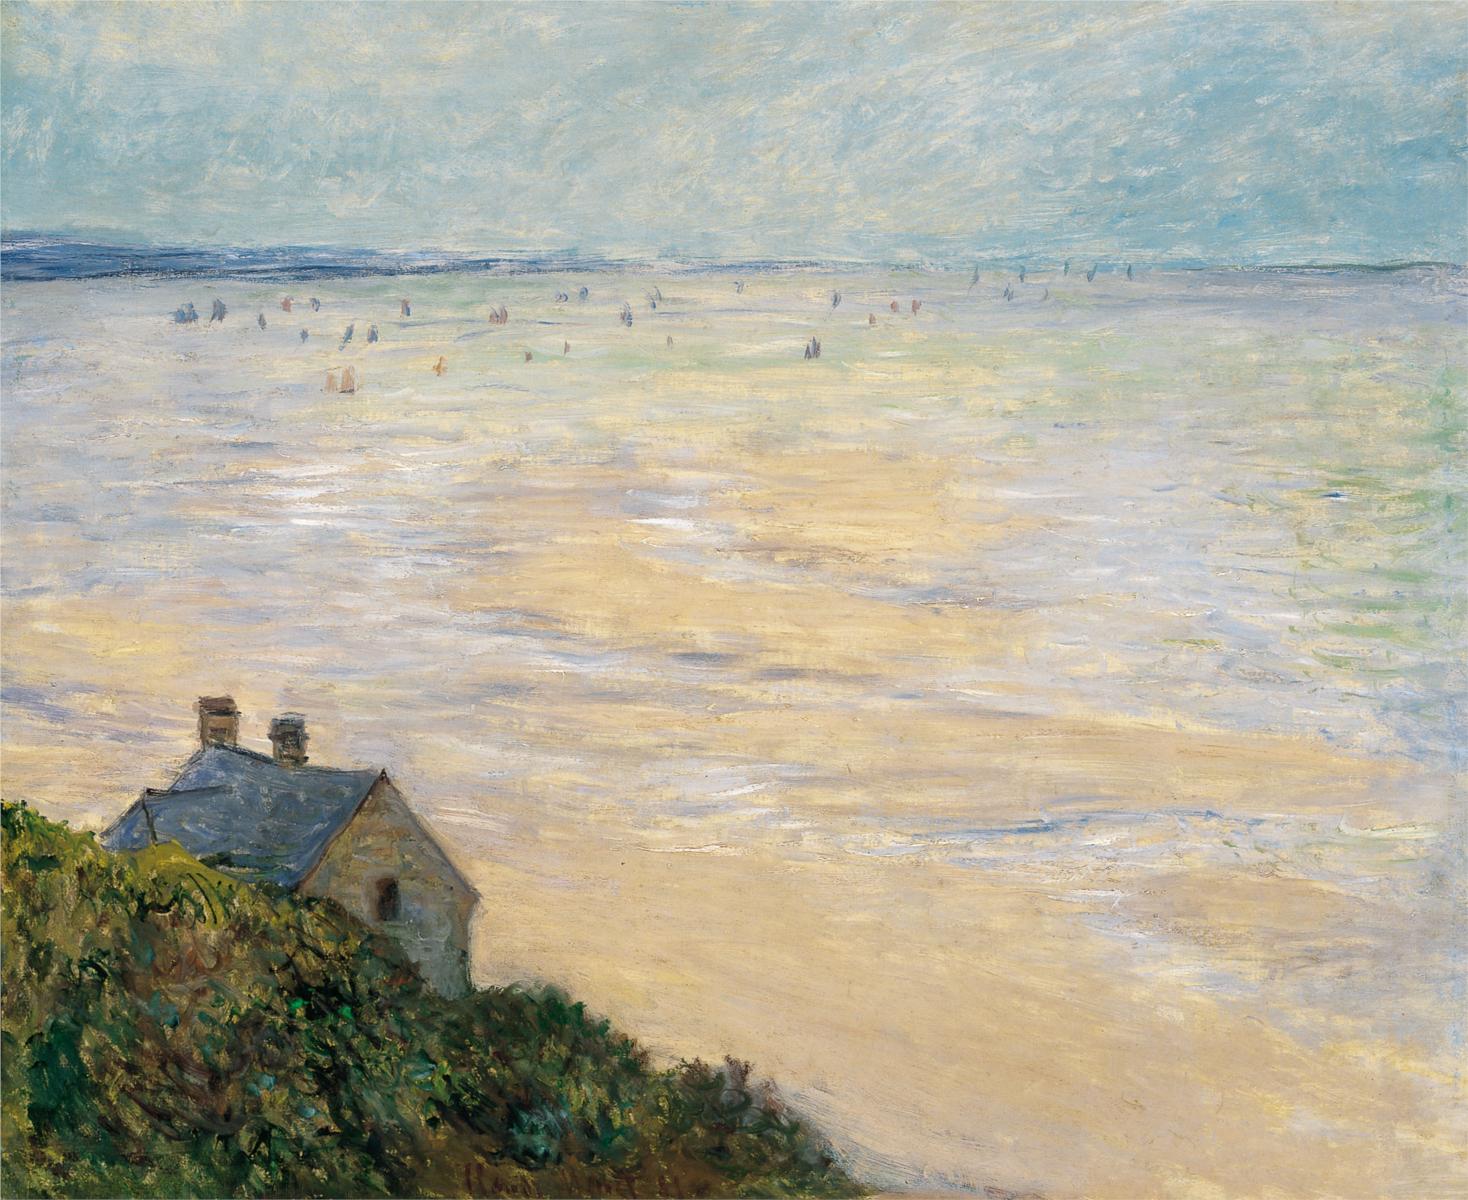 The Hut at Trouville, Low Tide, by Claude Monet, (1881), courtesy of Wikipaintings